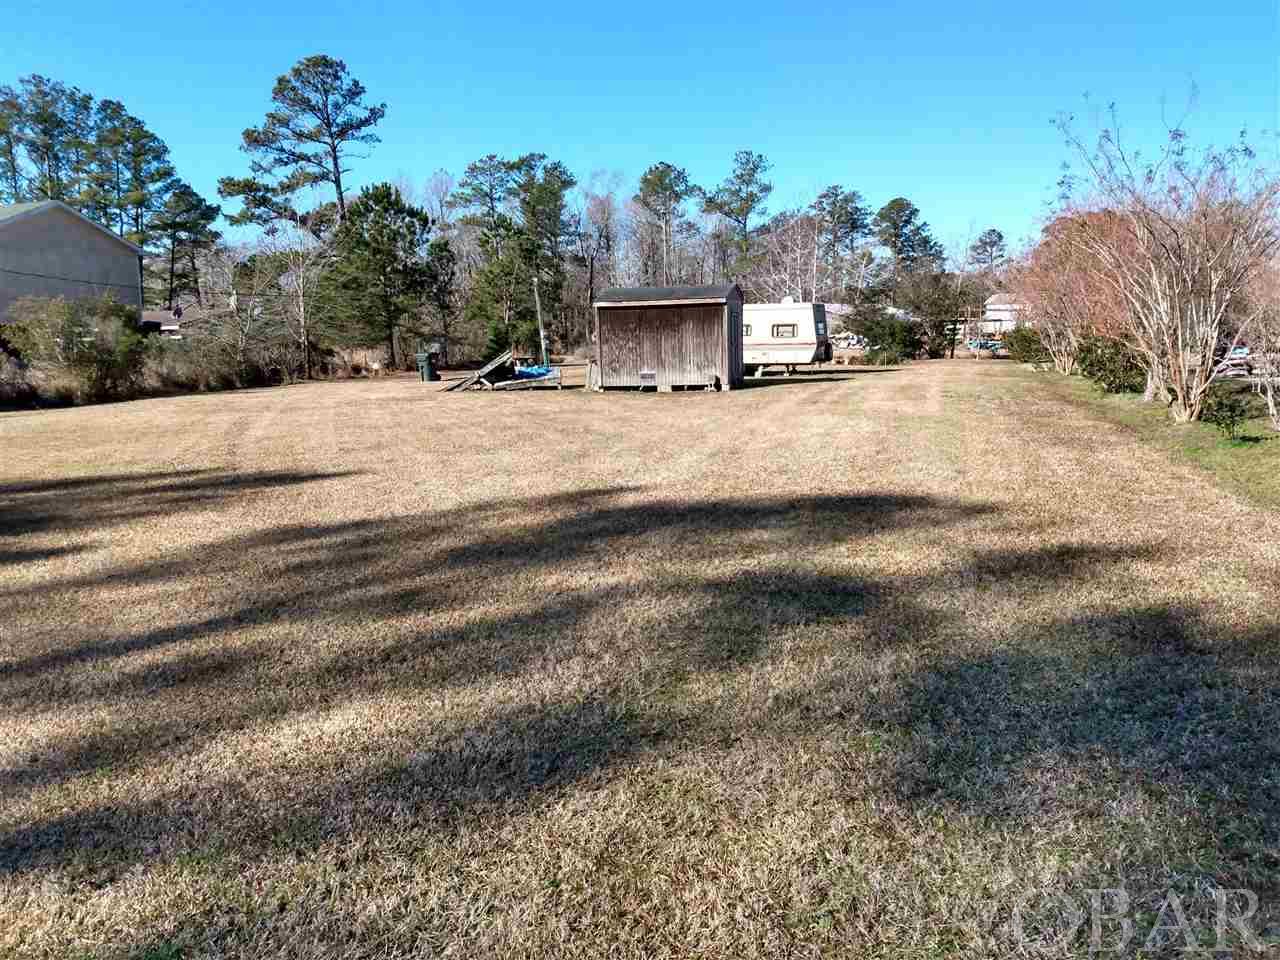 CANAL LOT NAVIGABLE TO SCUPPERNONG RIVER This .6 acre spacious canal lot is navigable to the Scuppernong River near Columbia, N.C.  It includes a 26' X 8' RV home and storage shed. Excellent site for a home, vacation spot or a stopping destination in route to the N. C. OBX!